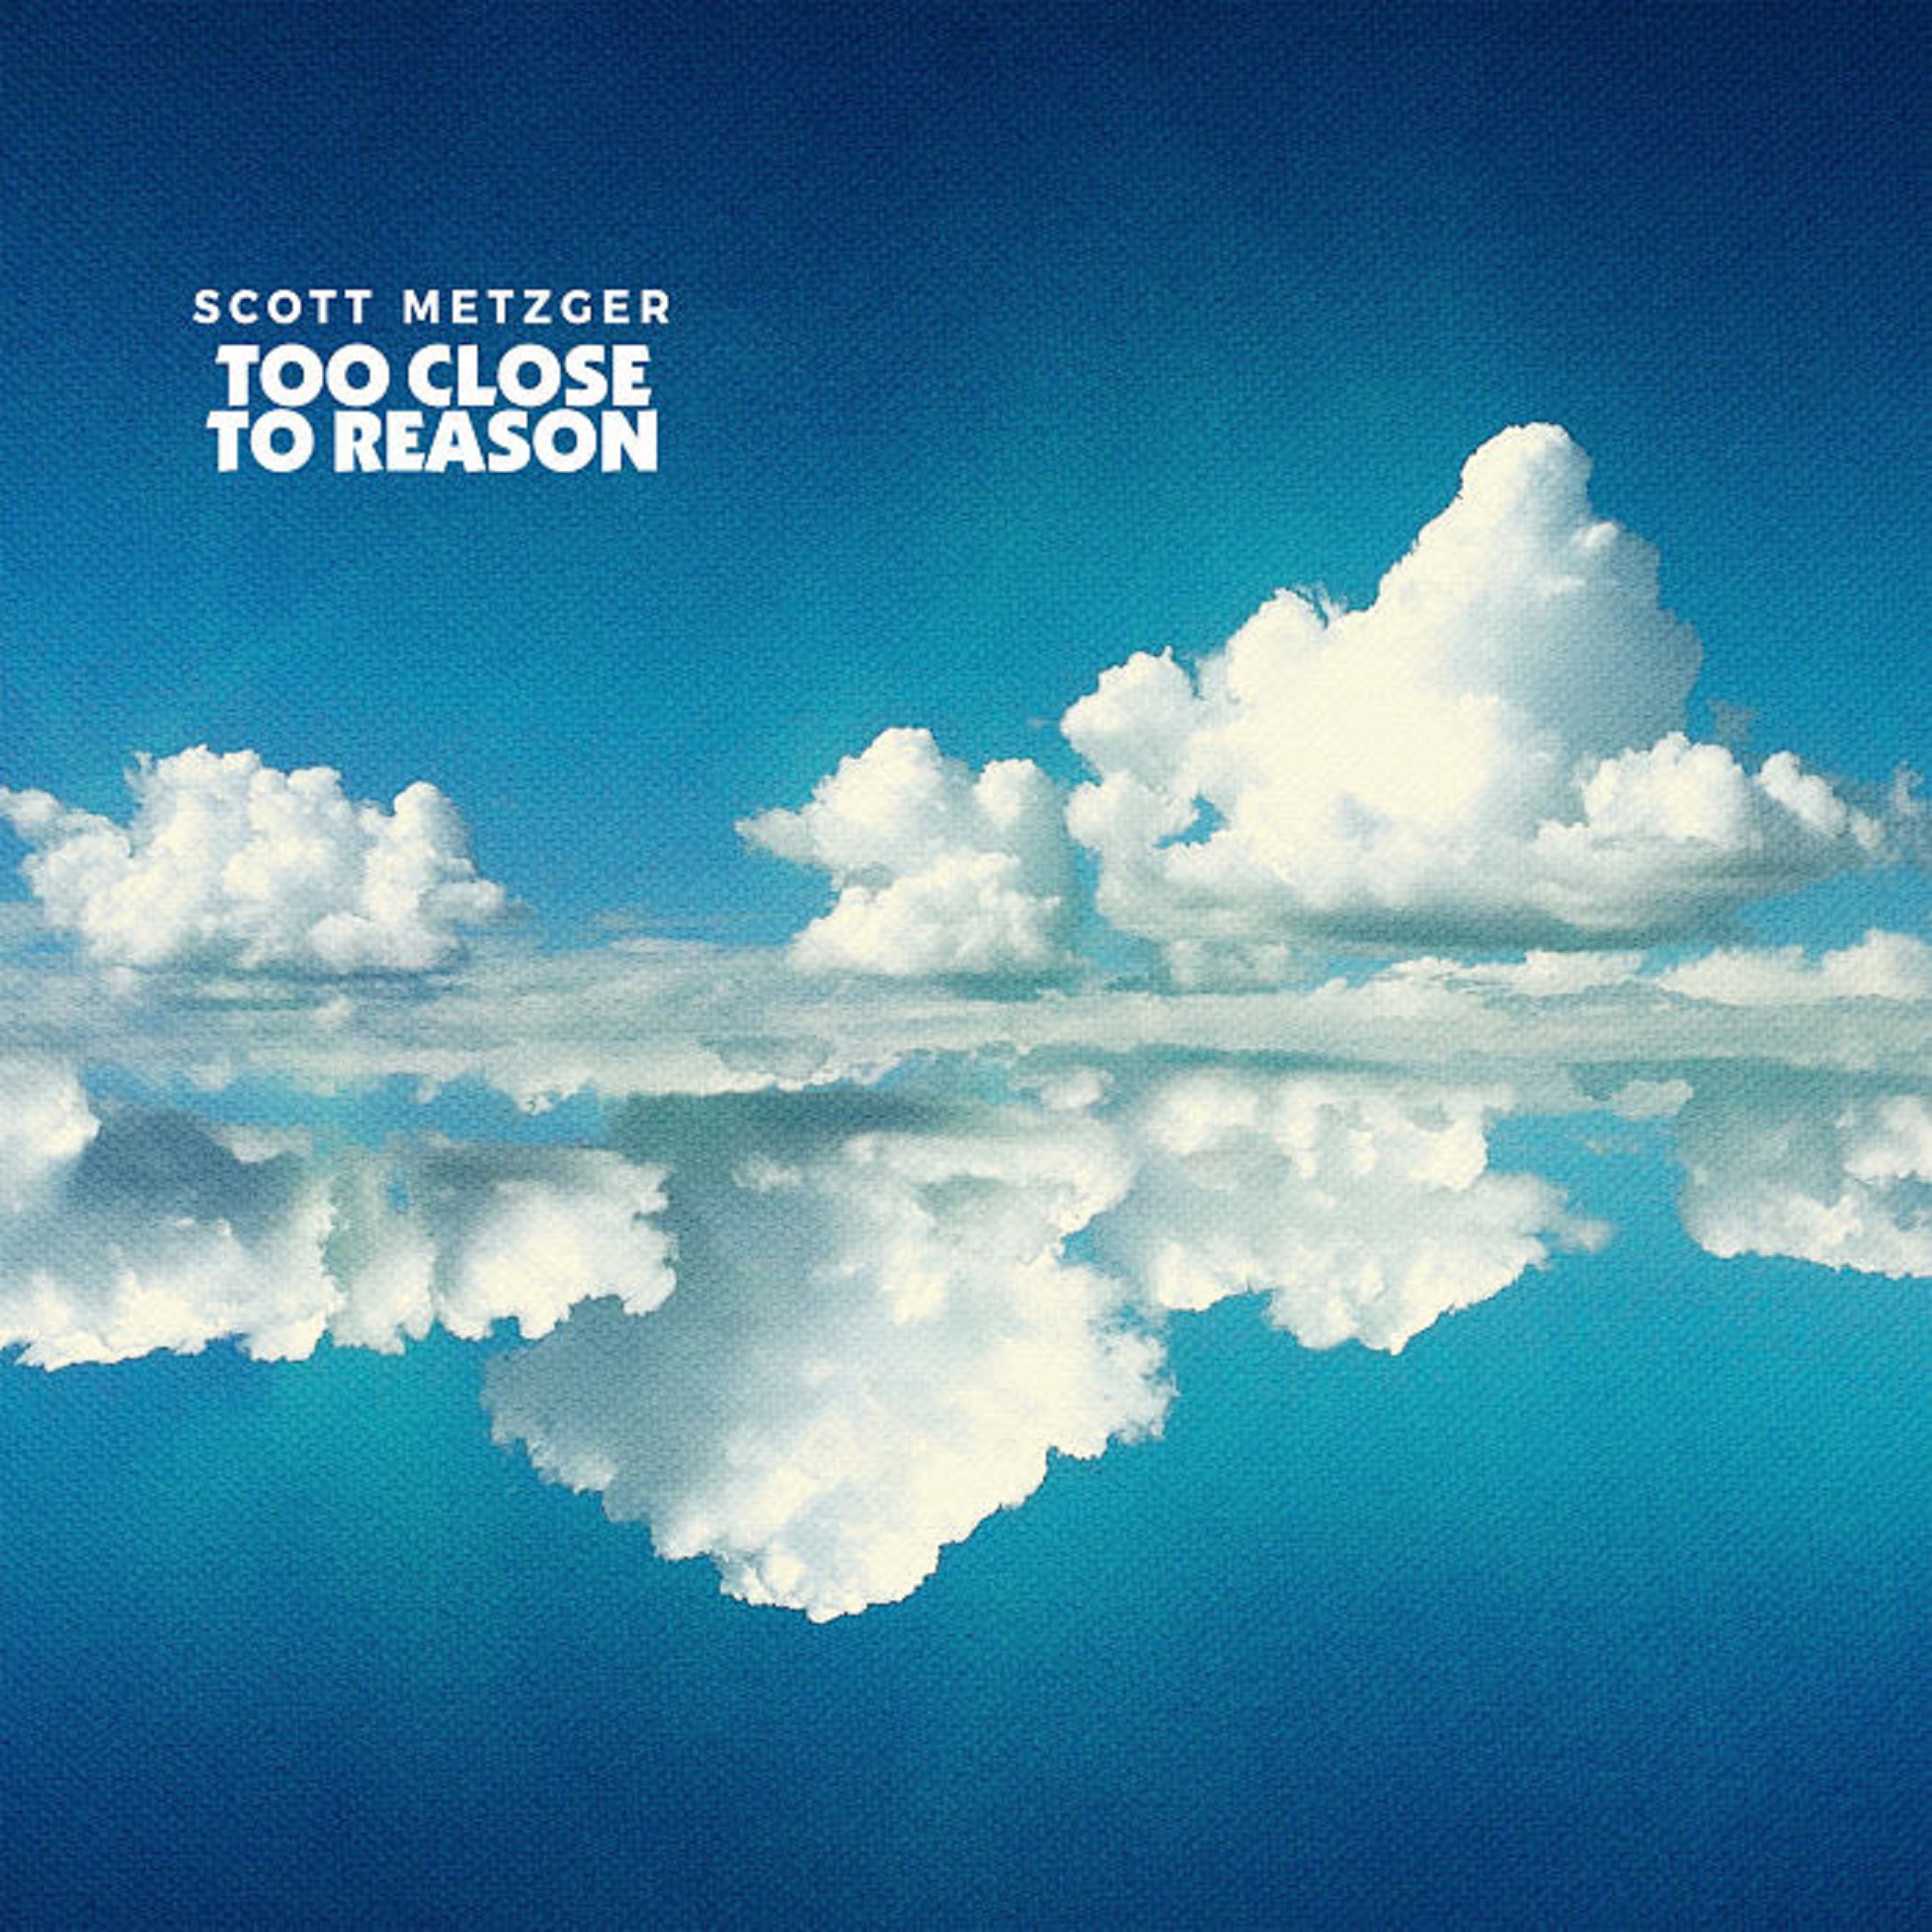 Scott Metzger 'Too Close To Reason' Out Today